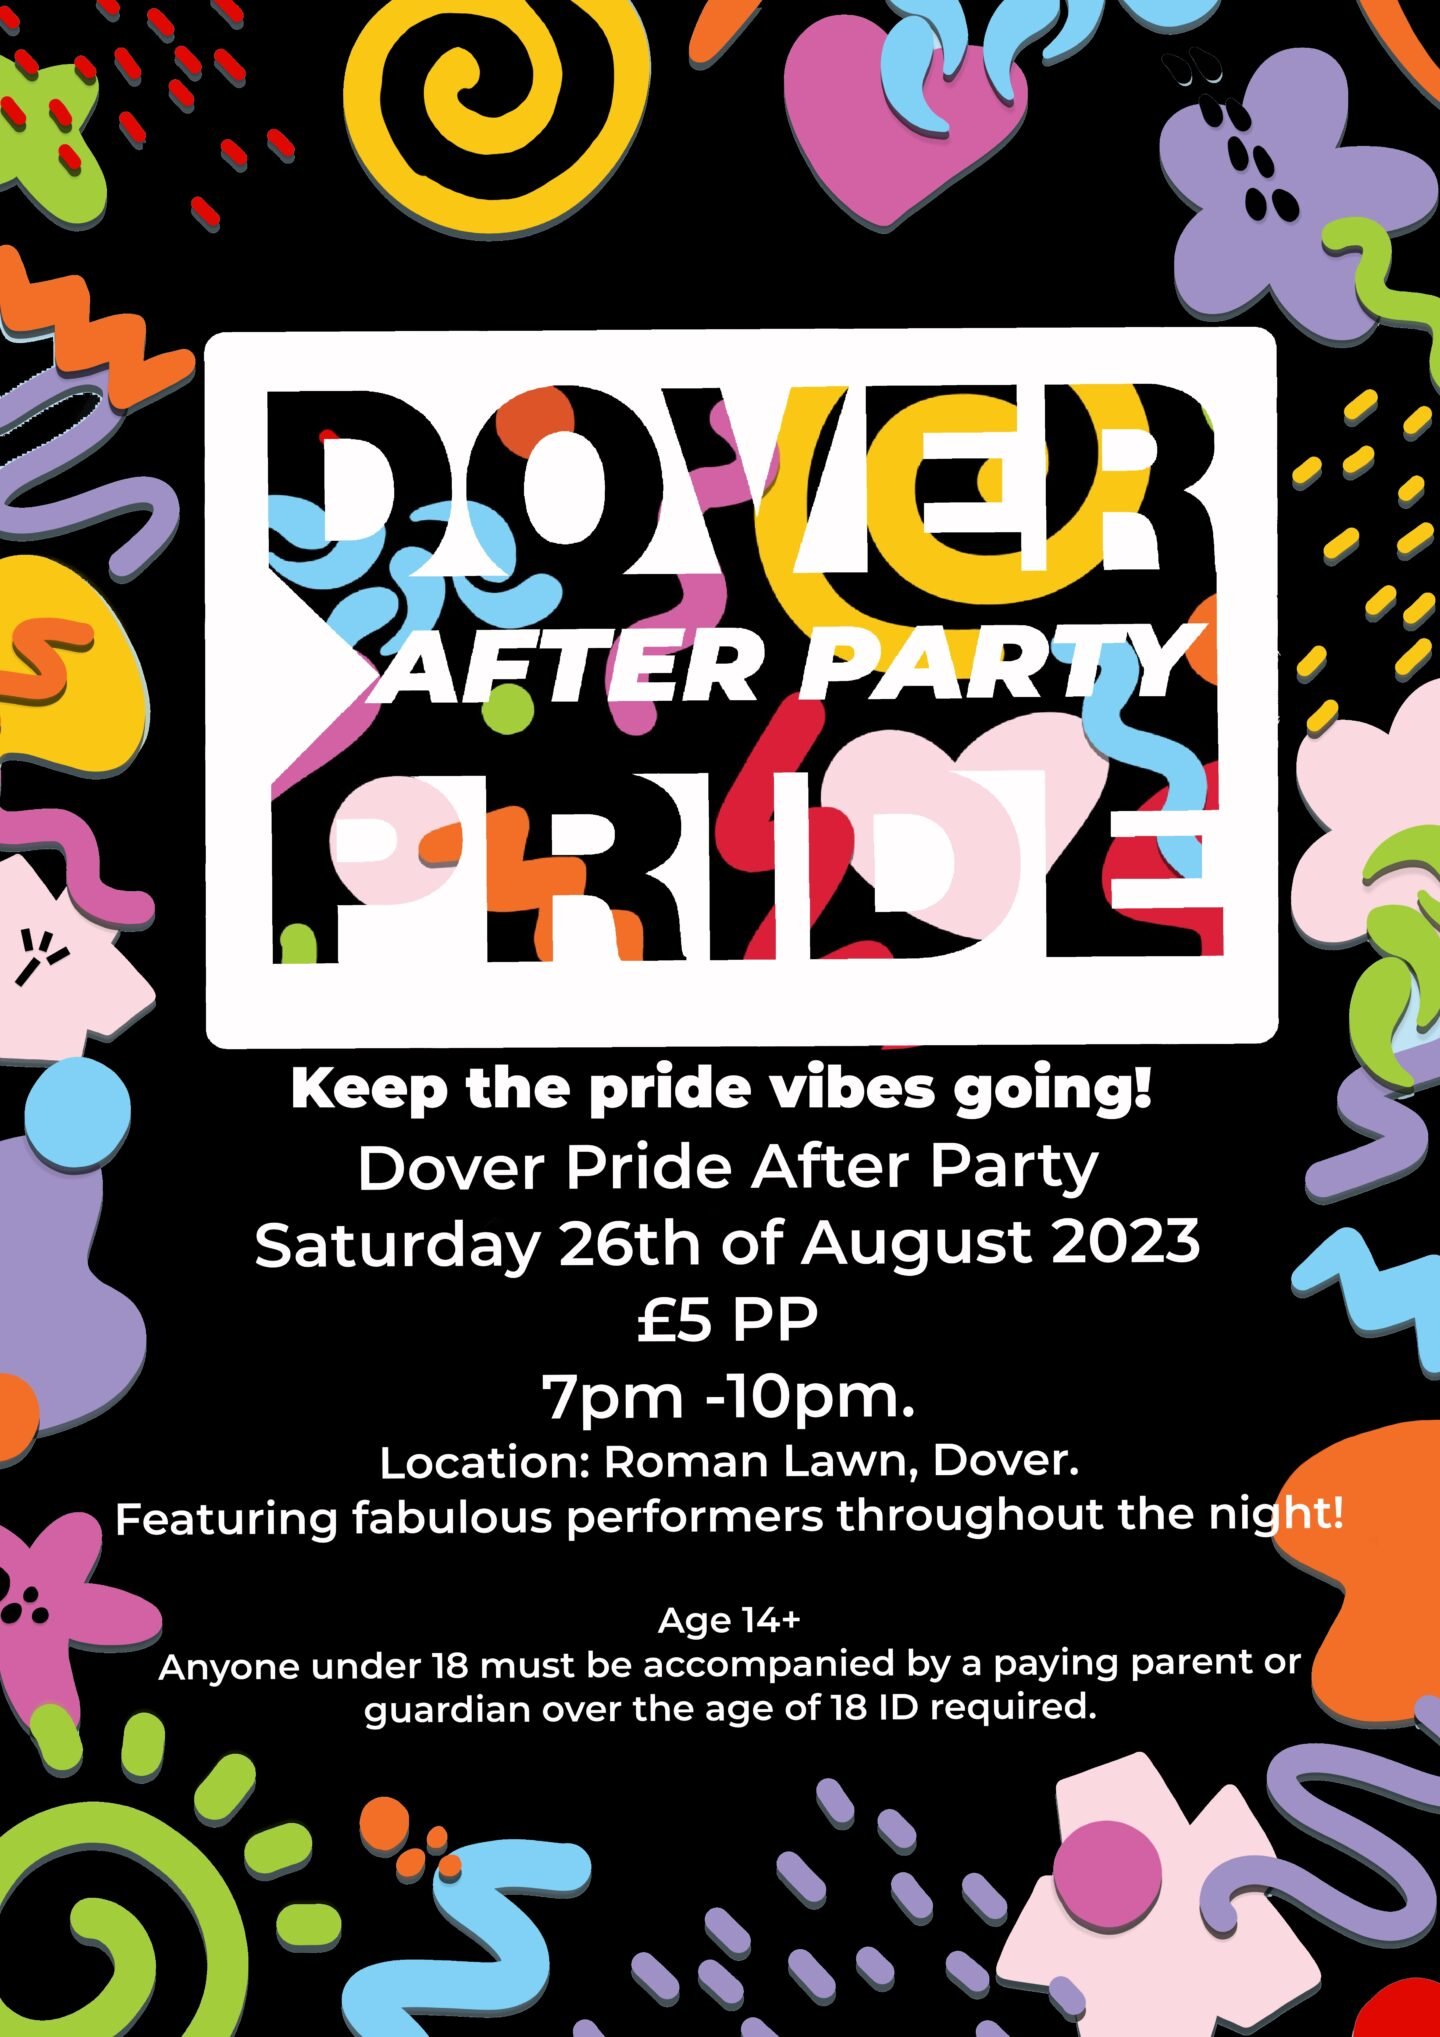 after party poster for dover pride 2023